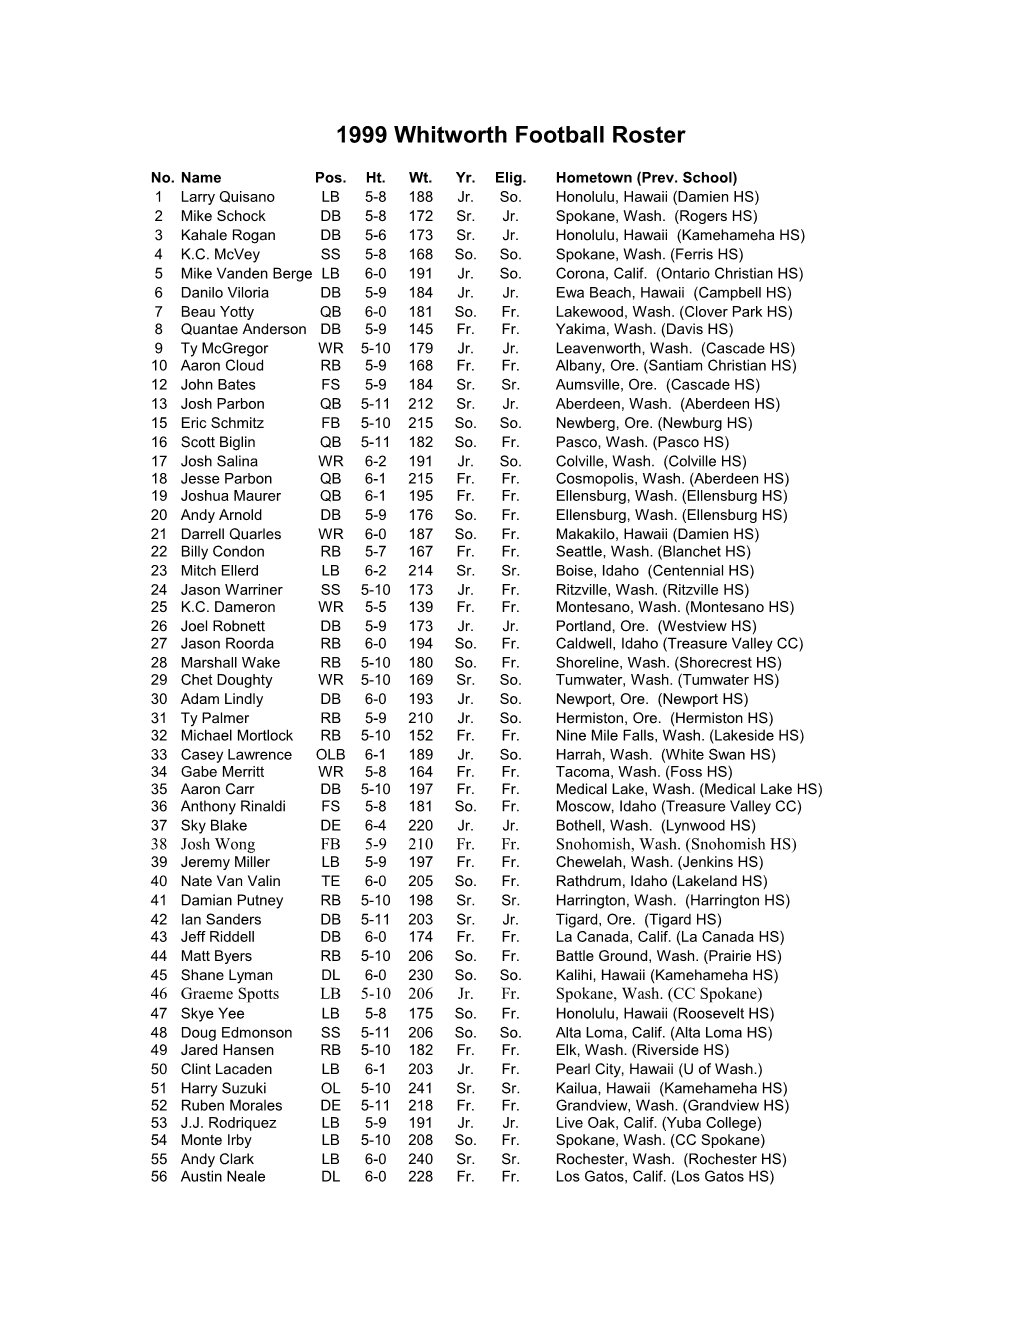 1998 Whitworth Football Roster